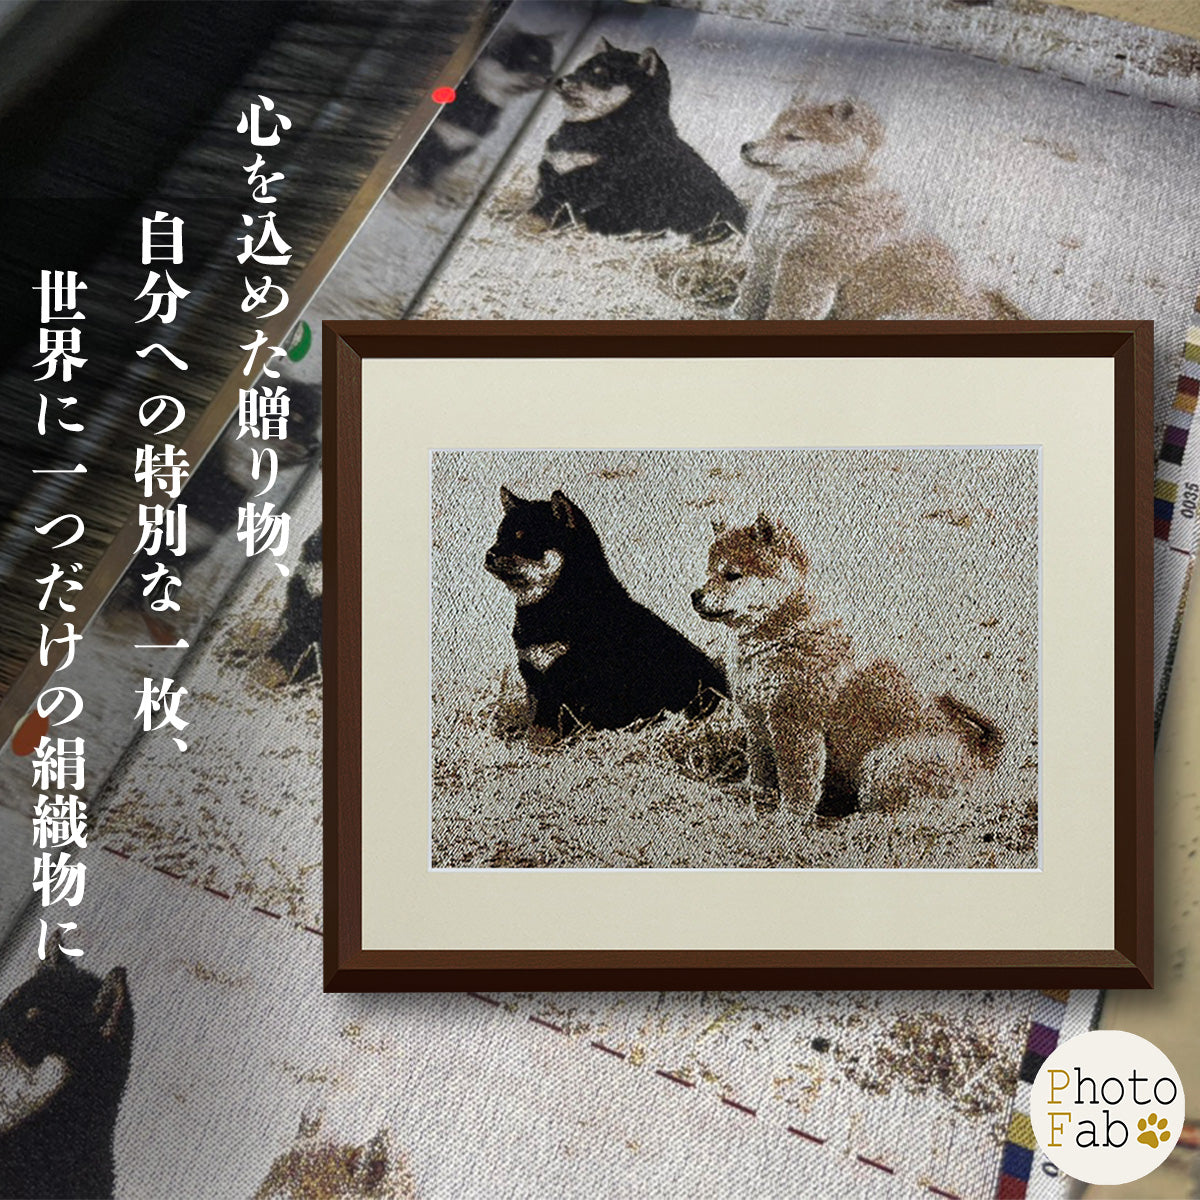 [Photo Fab] Let's make a one-of-a-kind photo fabric using Kyoto's traditional silk weaving!